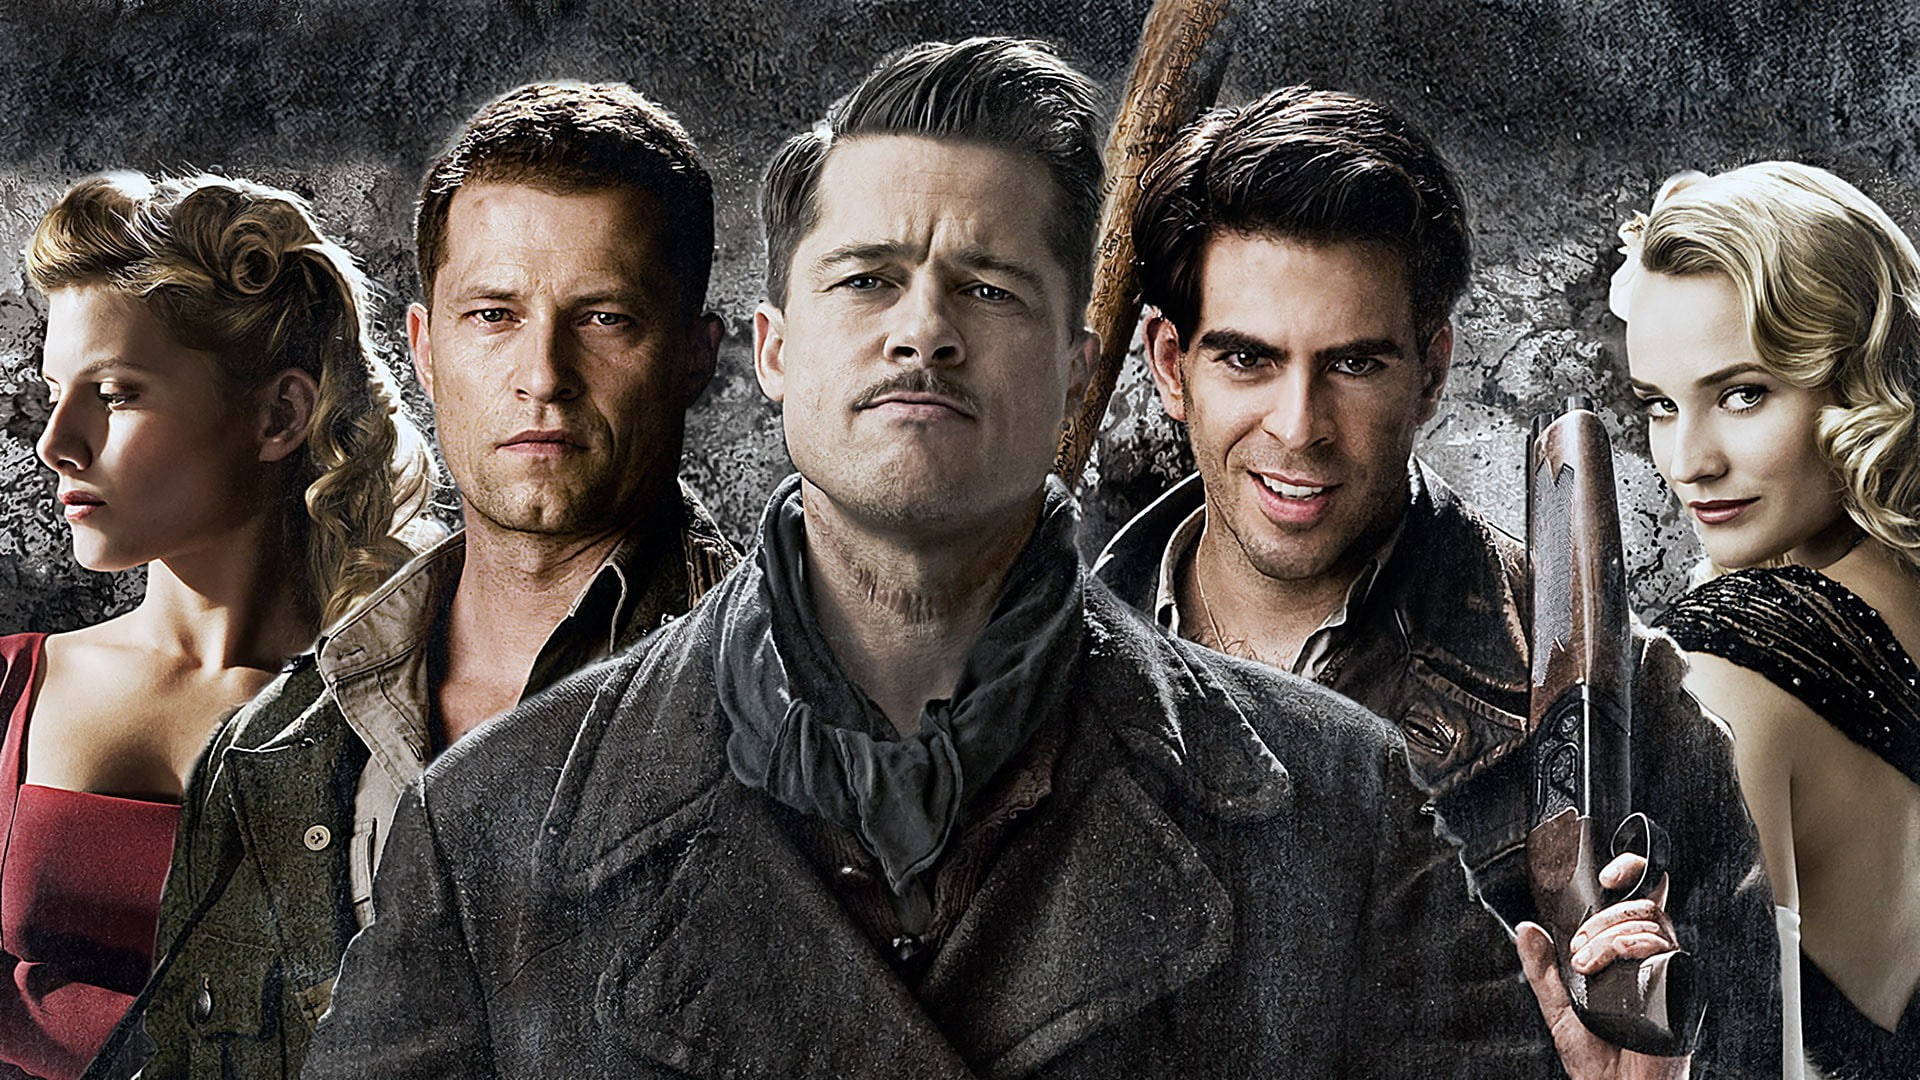 inglourious basterds movies, portrait, group of people, young men